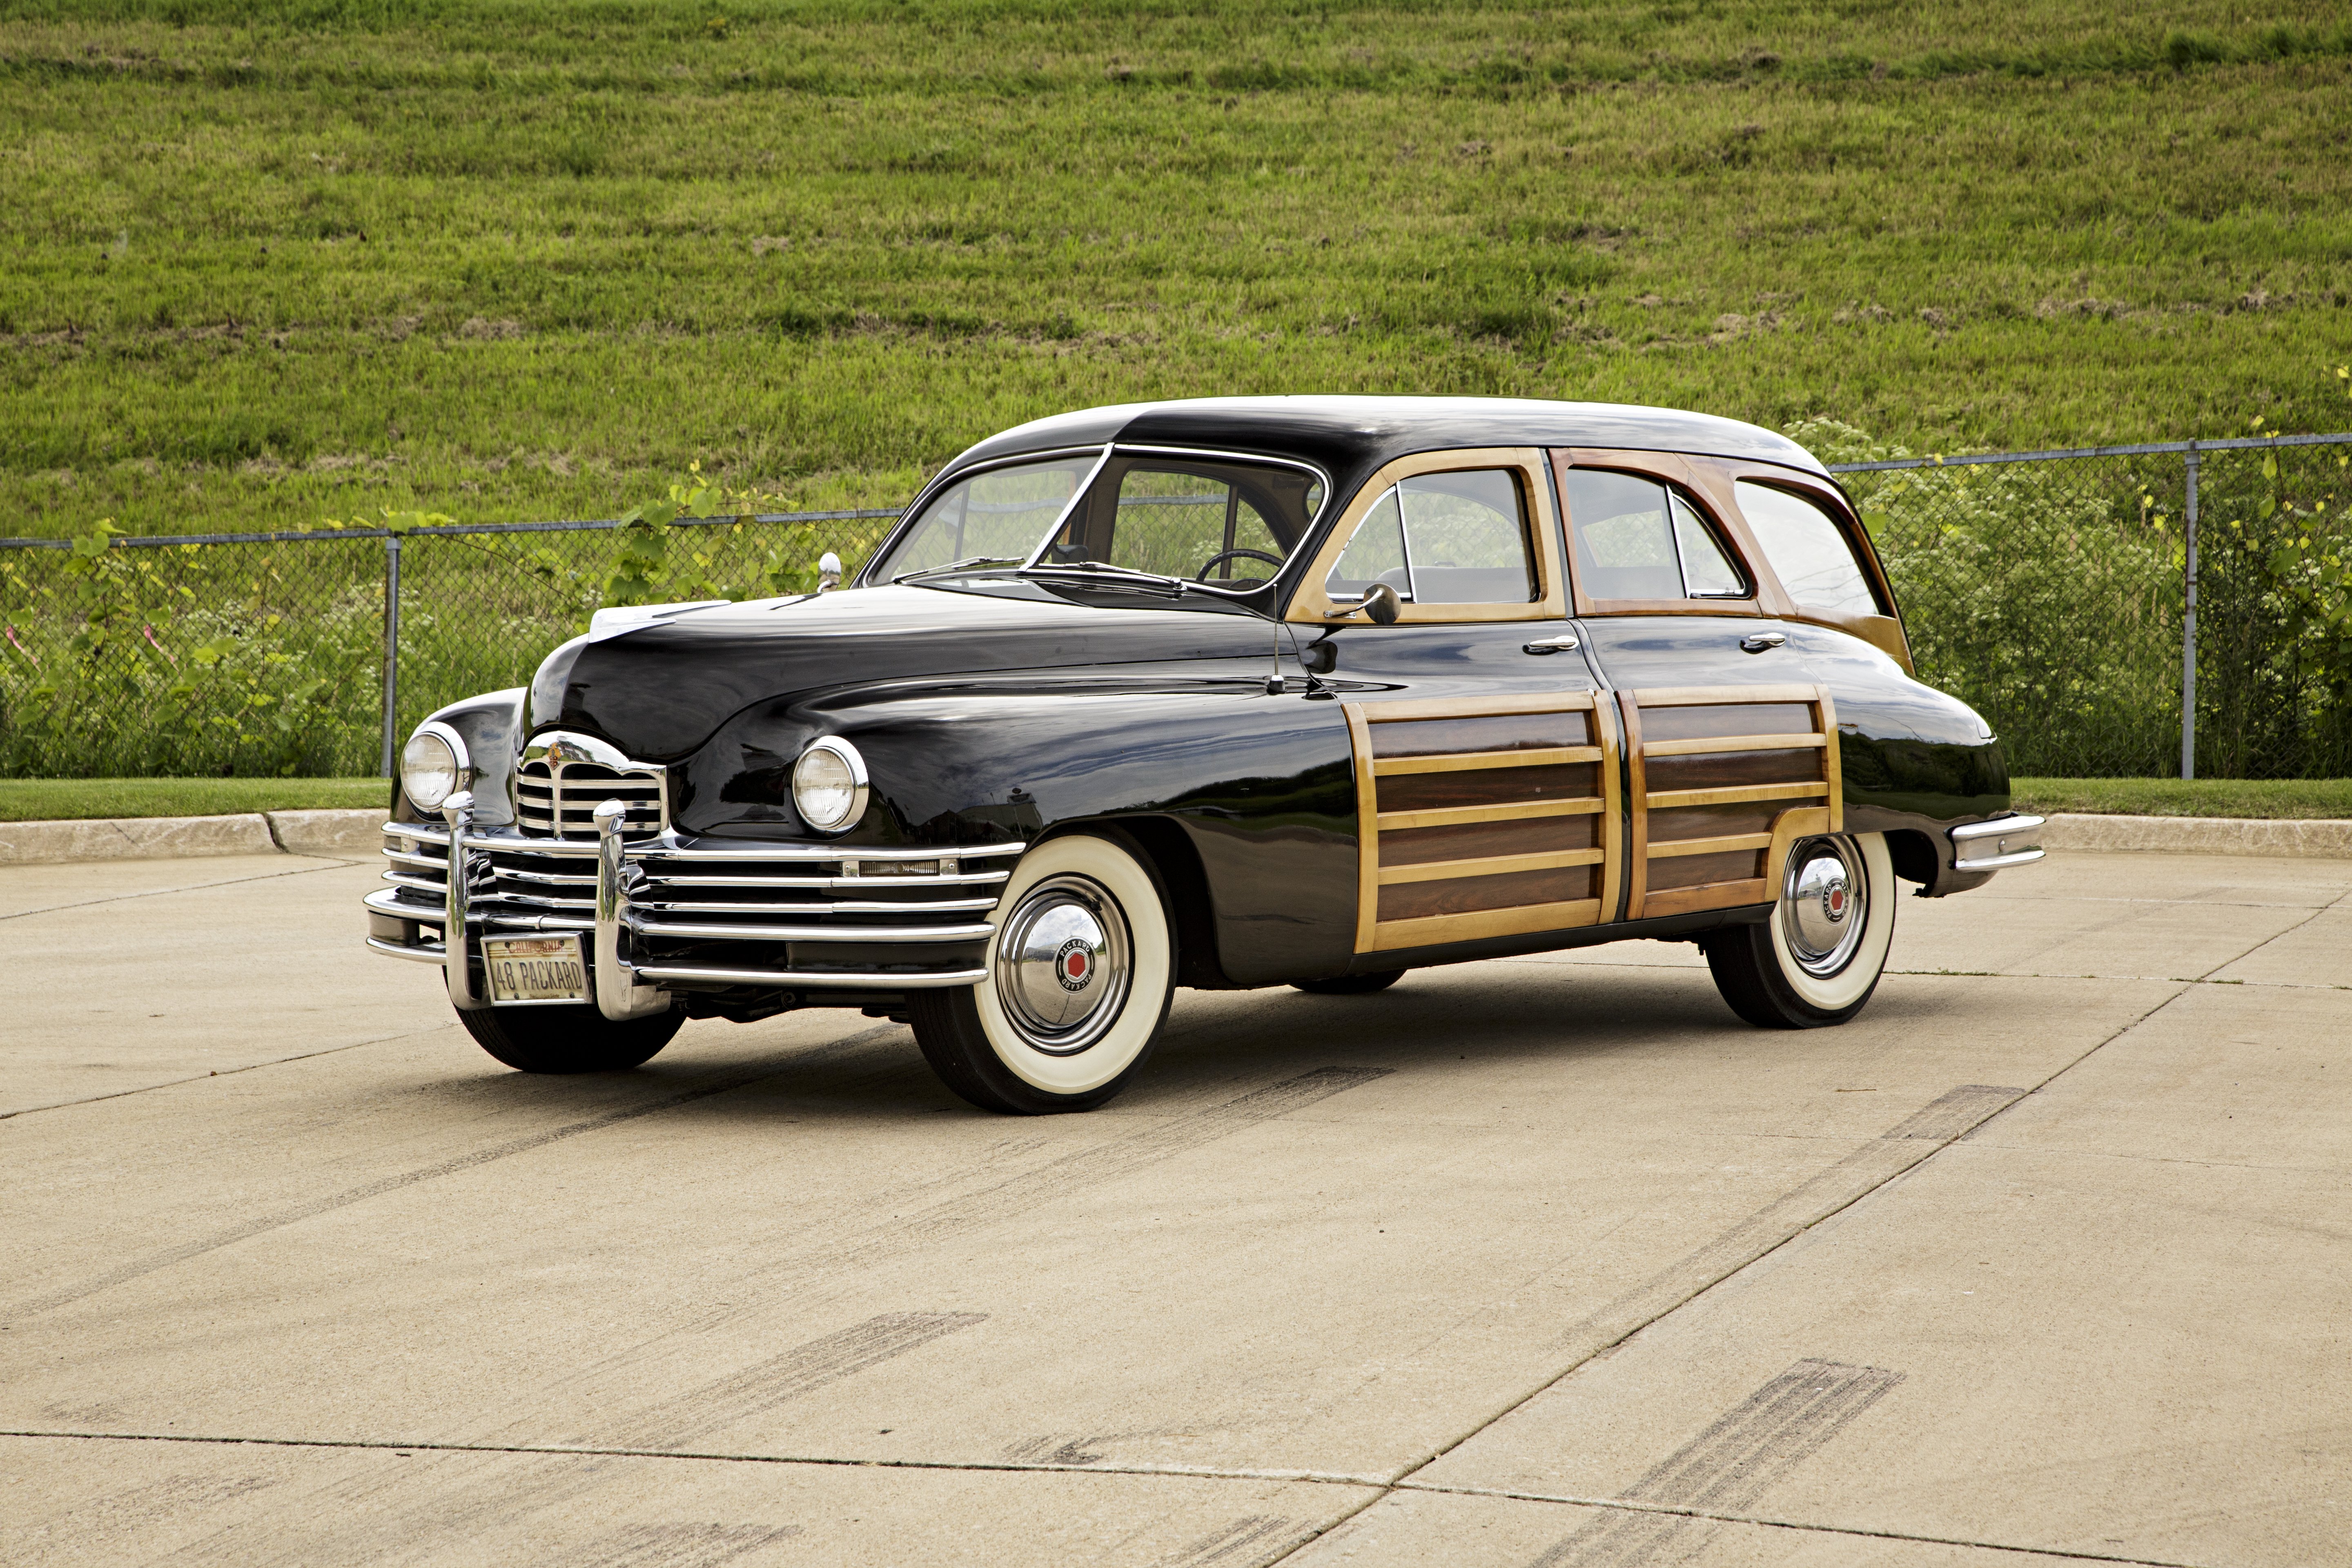 1948-packard-woody-station-wagon-classic-old-vintage-retro